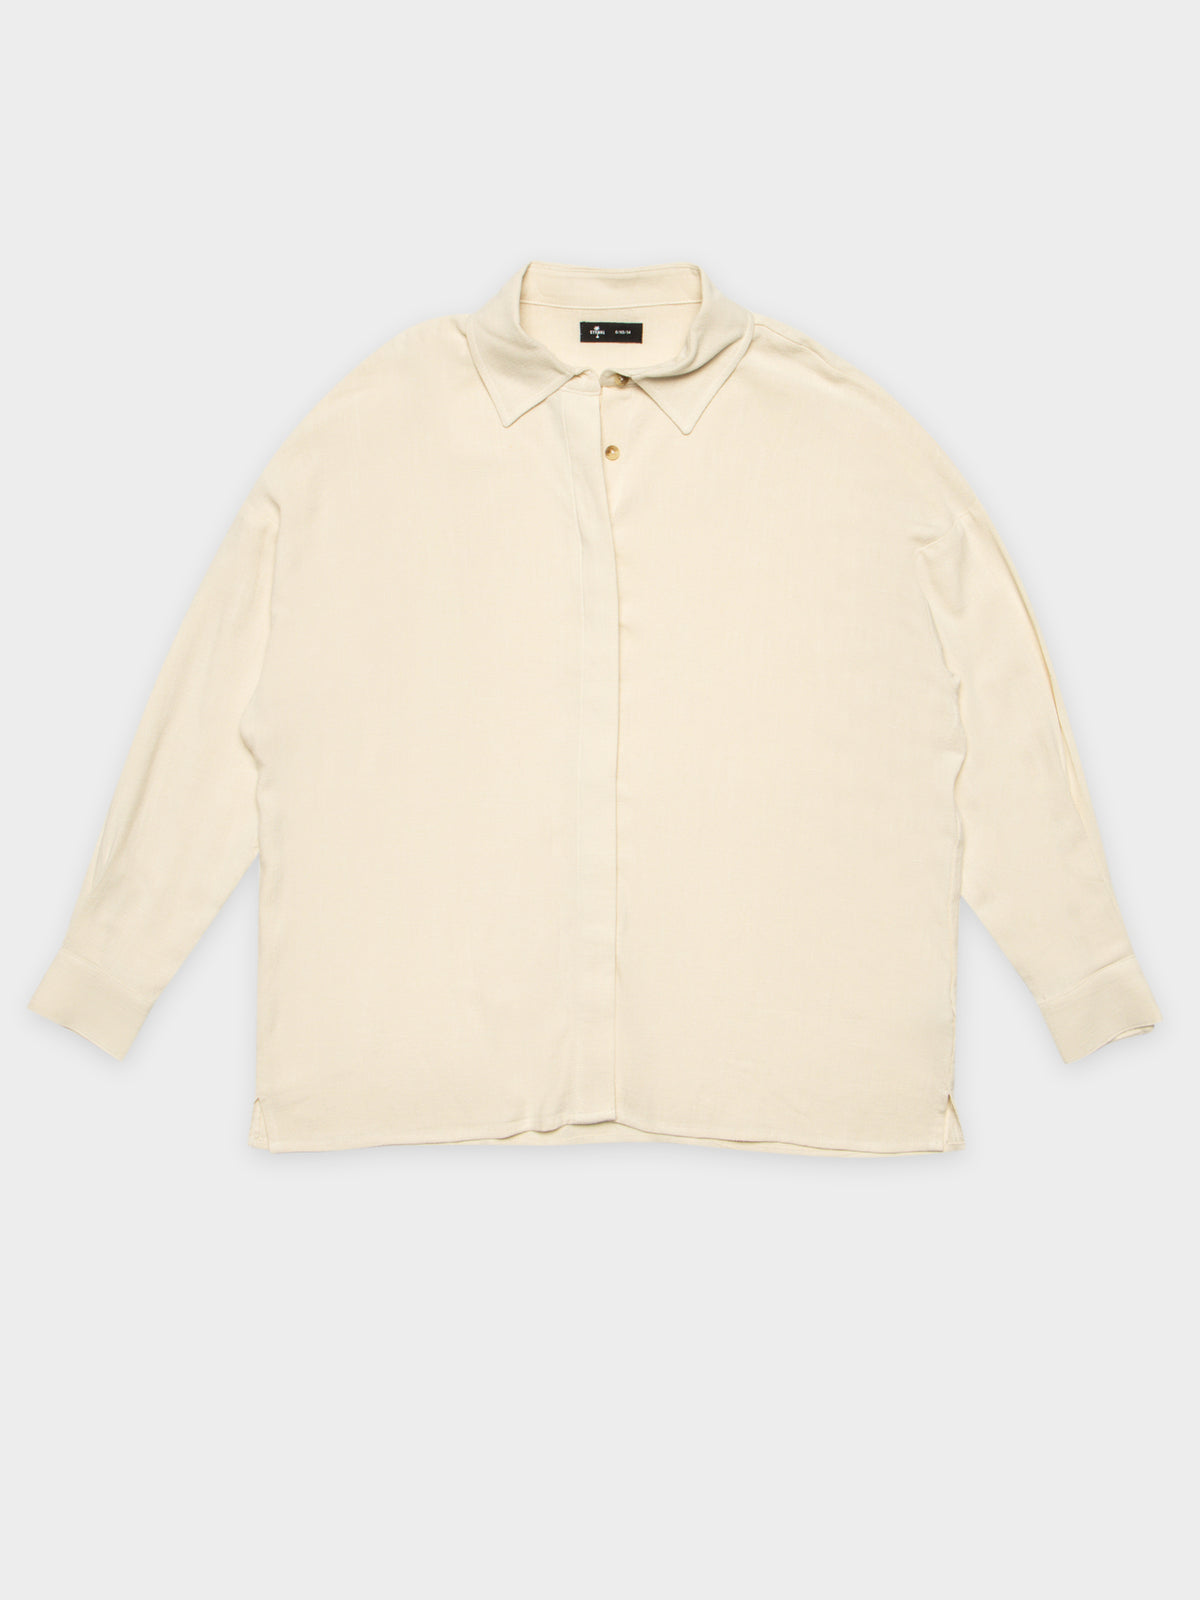 Olive Long Sleeve Shirt in Ivory